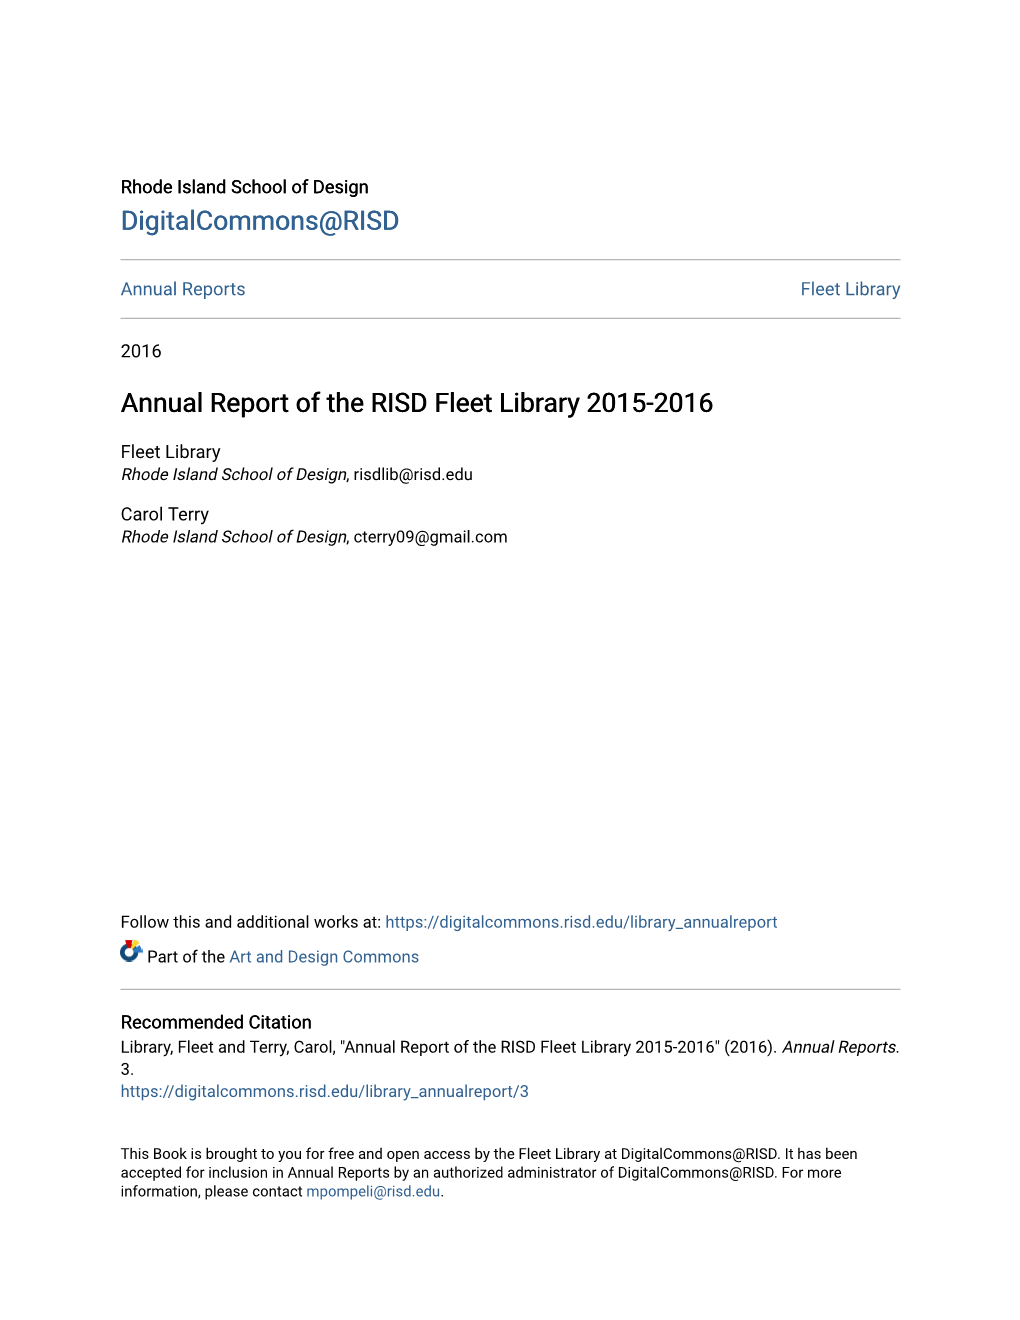 Annual Report of the RISD Fleet Library 2015-2016